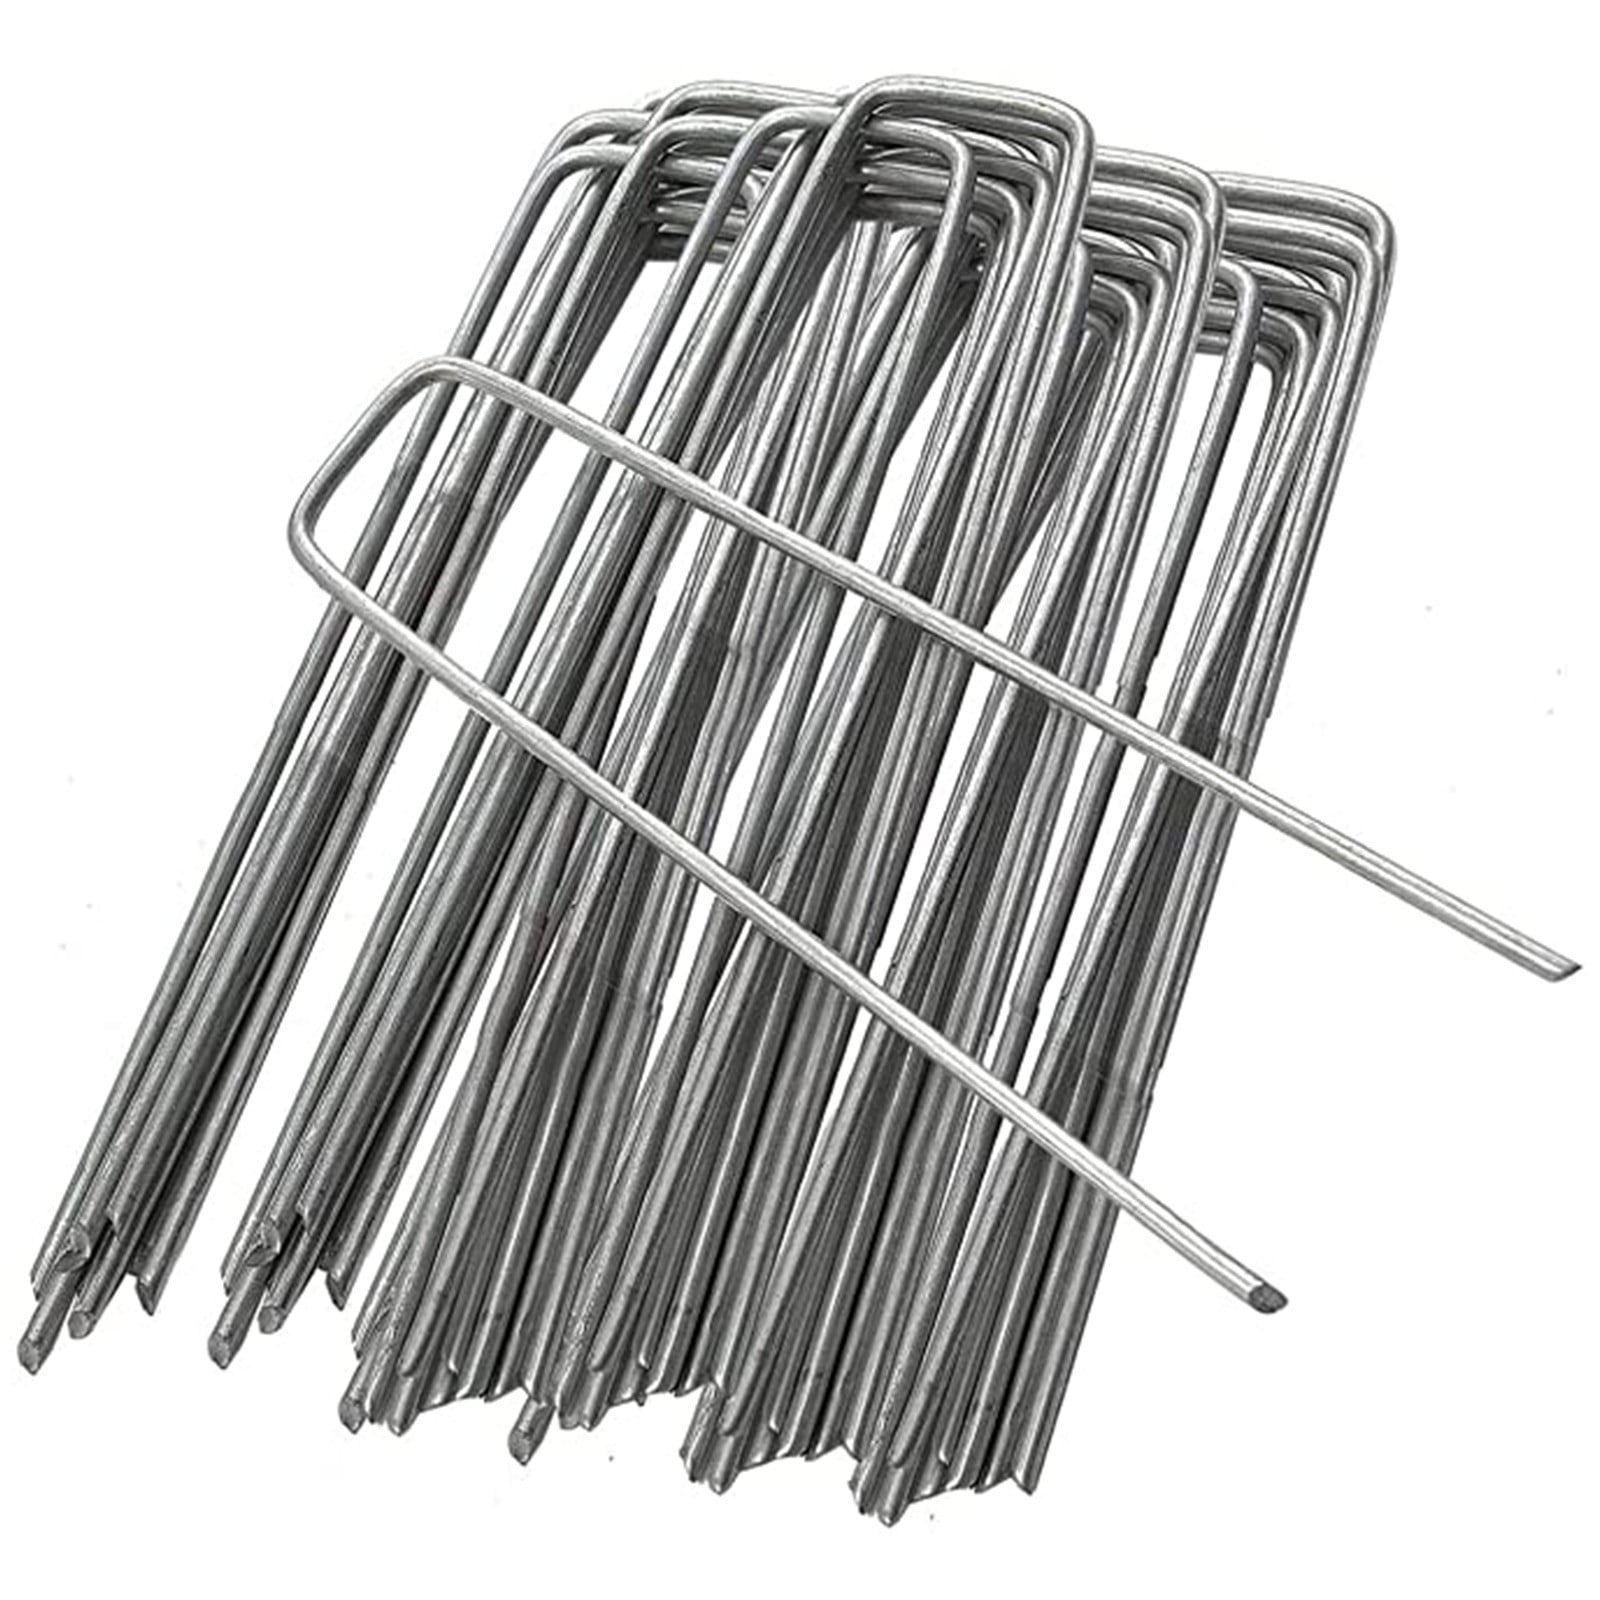 100-PACK One Stop Outdoor Multi Use Weed Fabric Erosion Netting & Tarp Stakes 6 Heavy Duty Professional Grade Plastic Landscape & Garden Spikes 